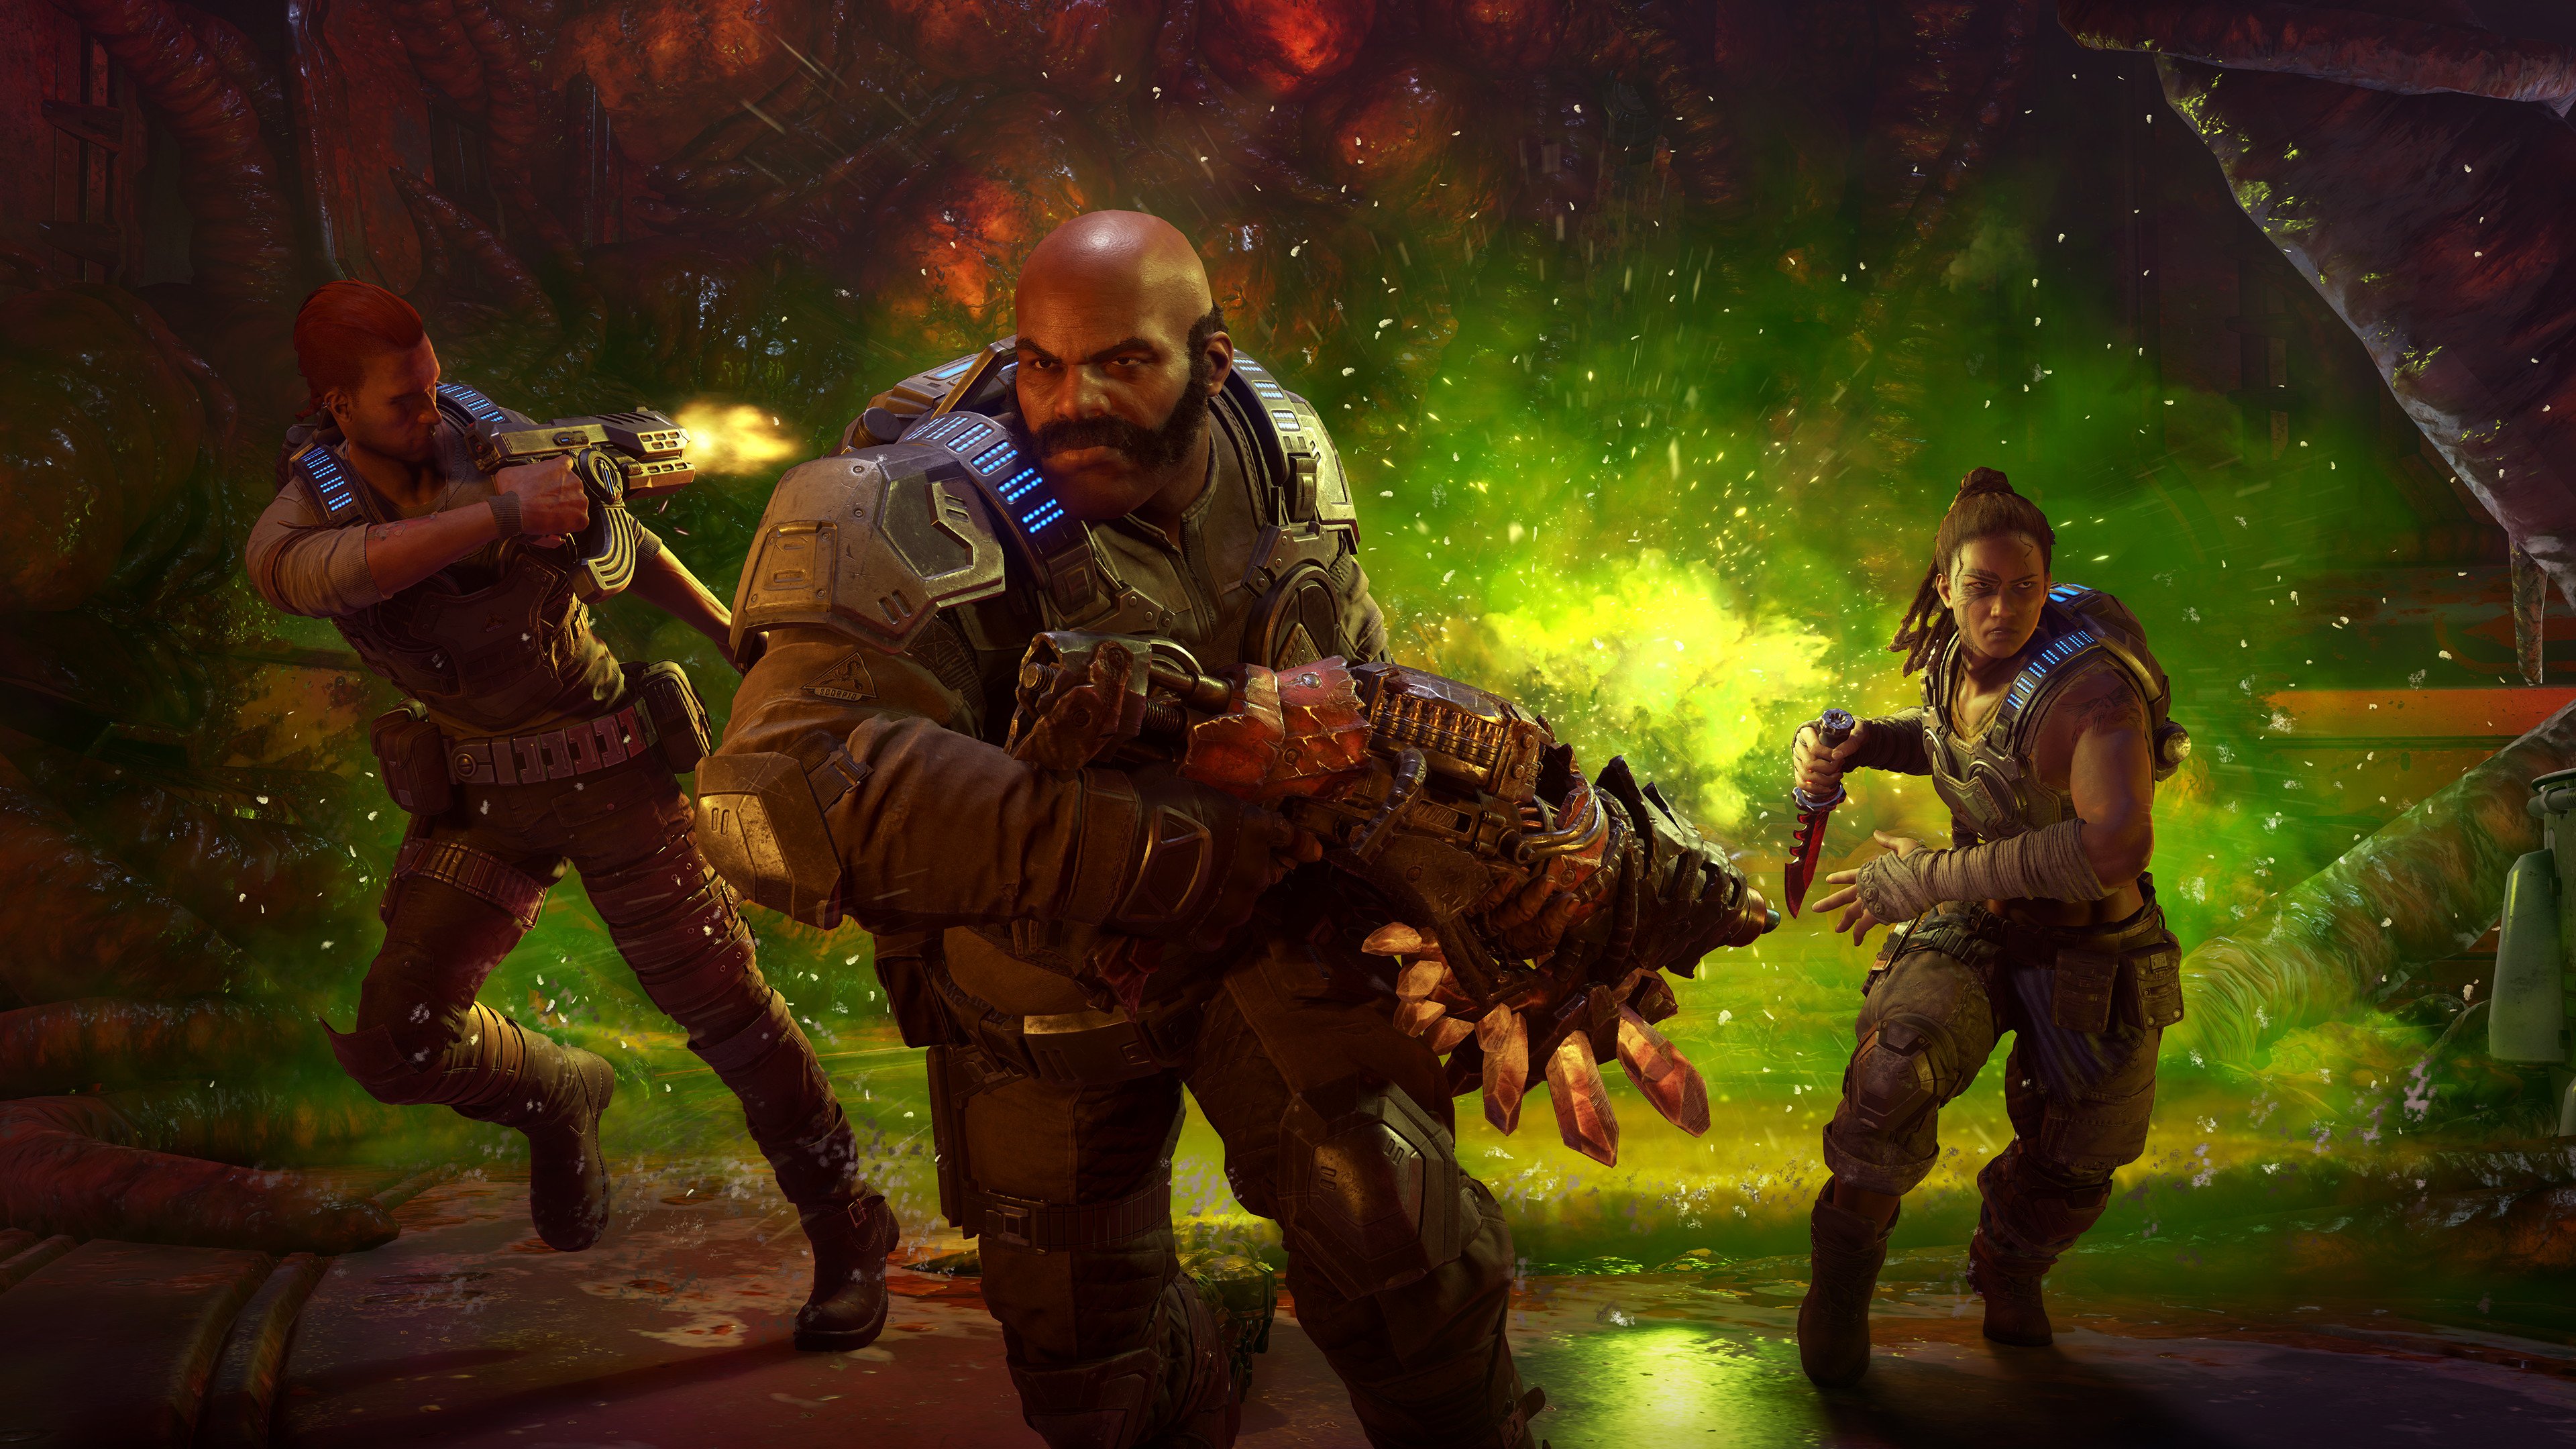 Gears 5 is getting story DLC and its Xbox Series X/S update lets you recast  Marcus Fenix as Dave Bautista